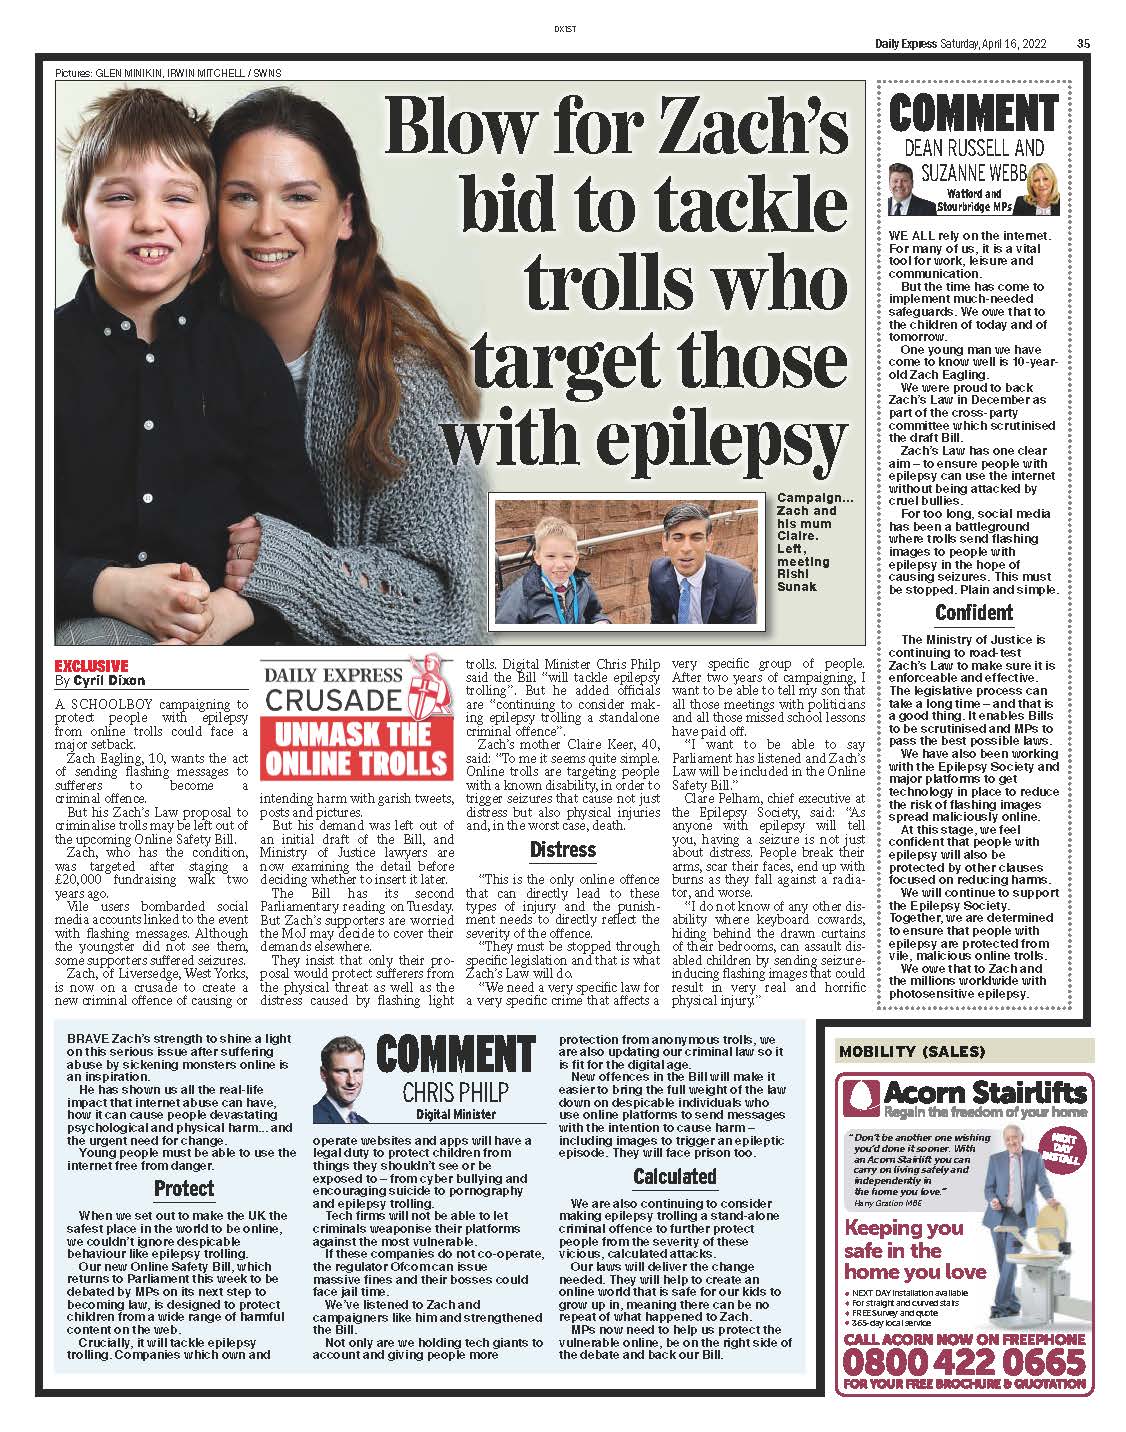 Zach and his mum, Claire Keer are photographed in the express page 35